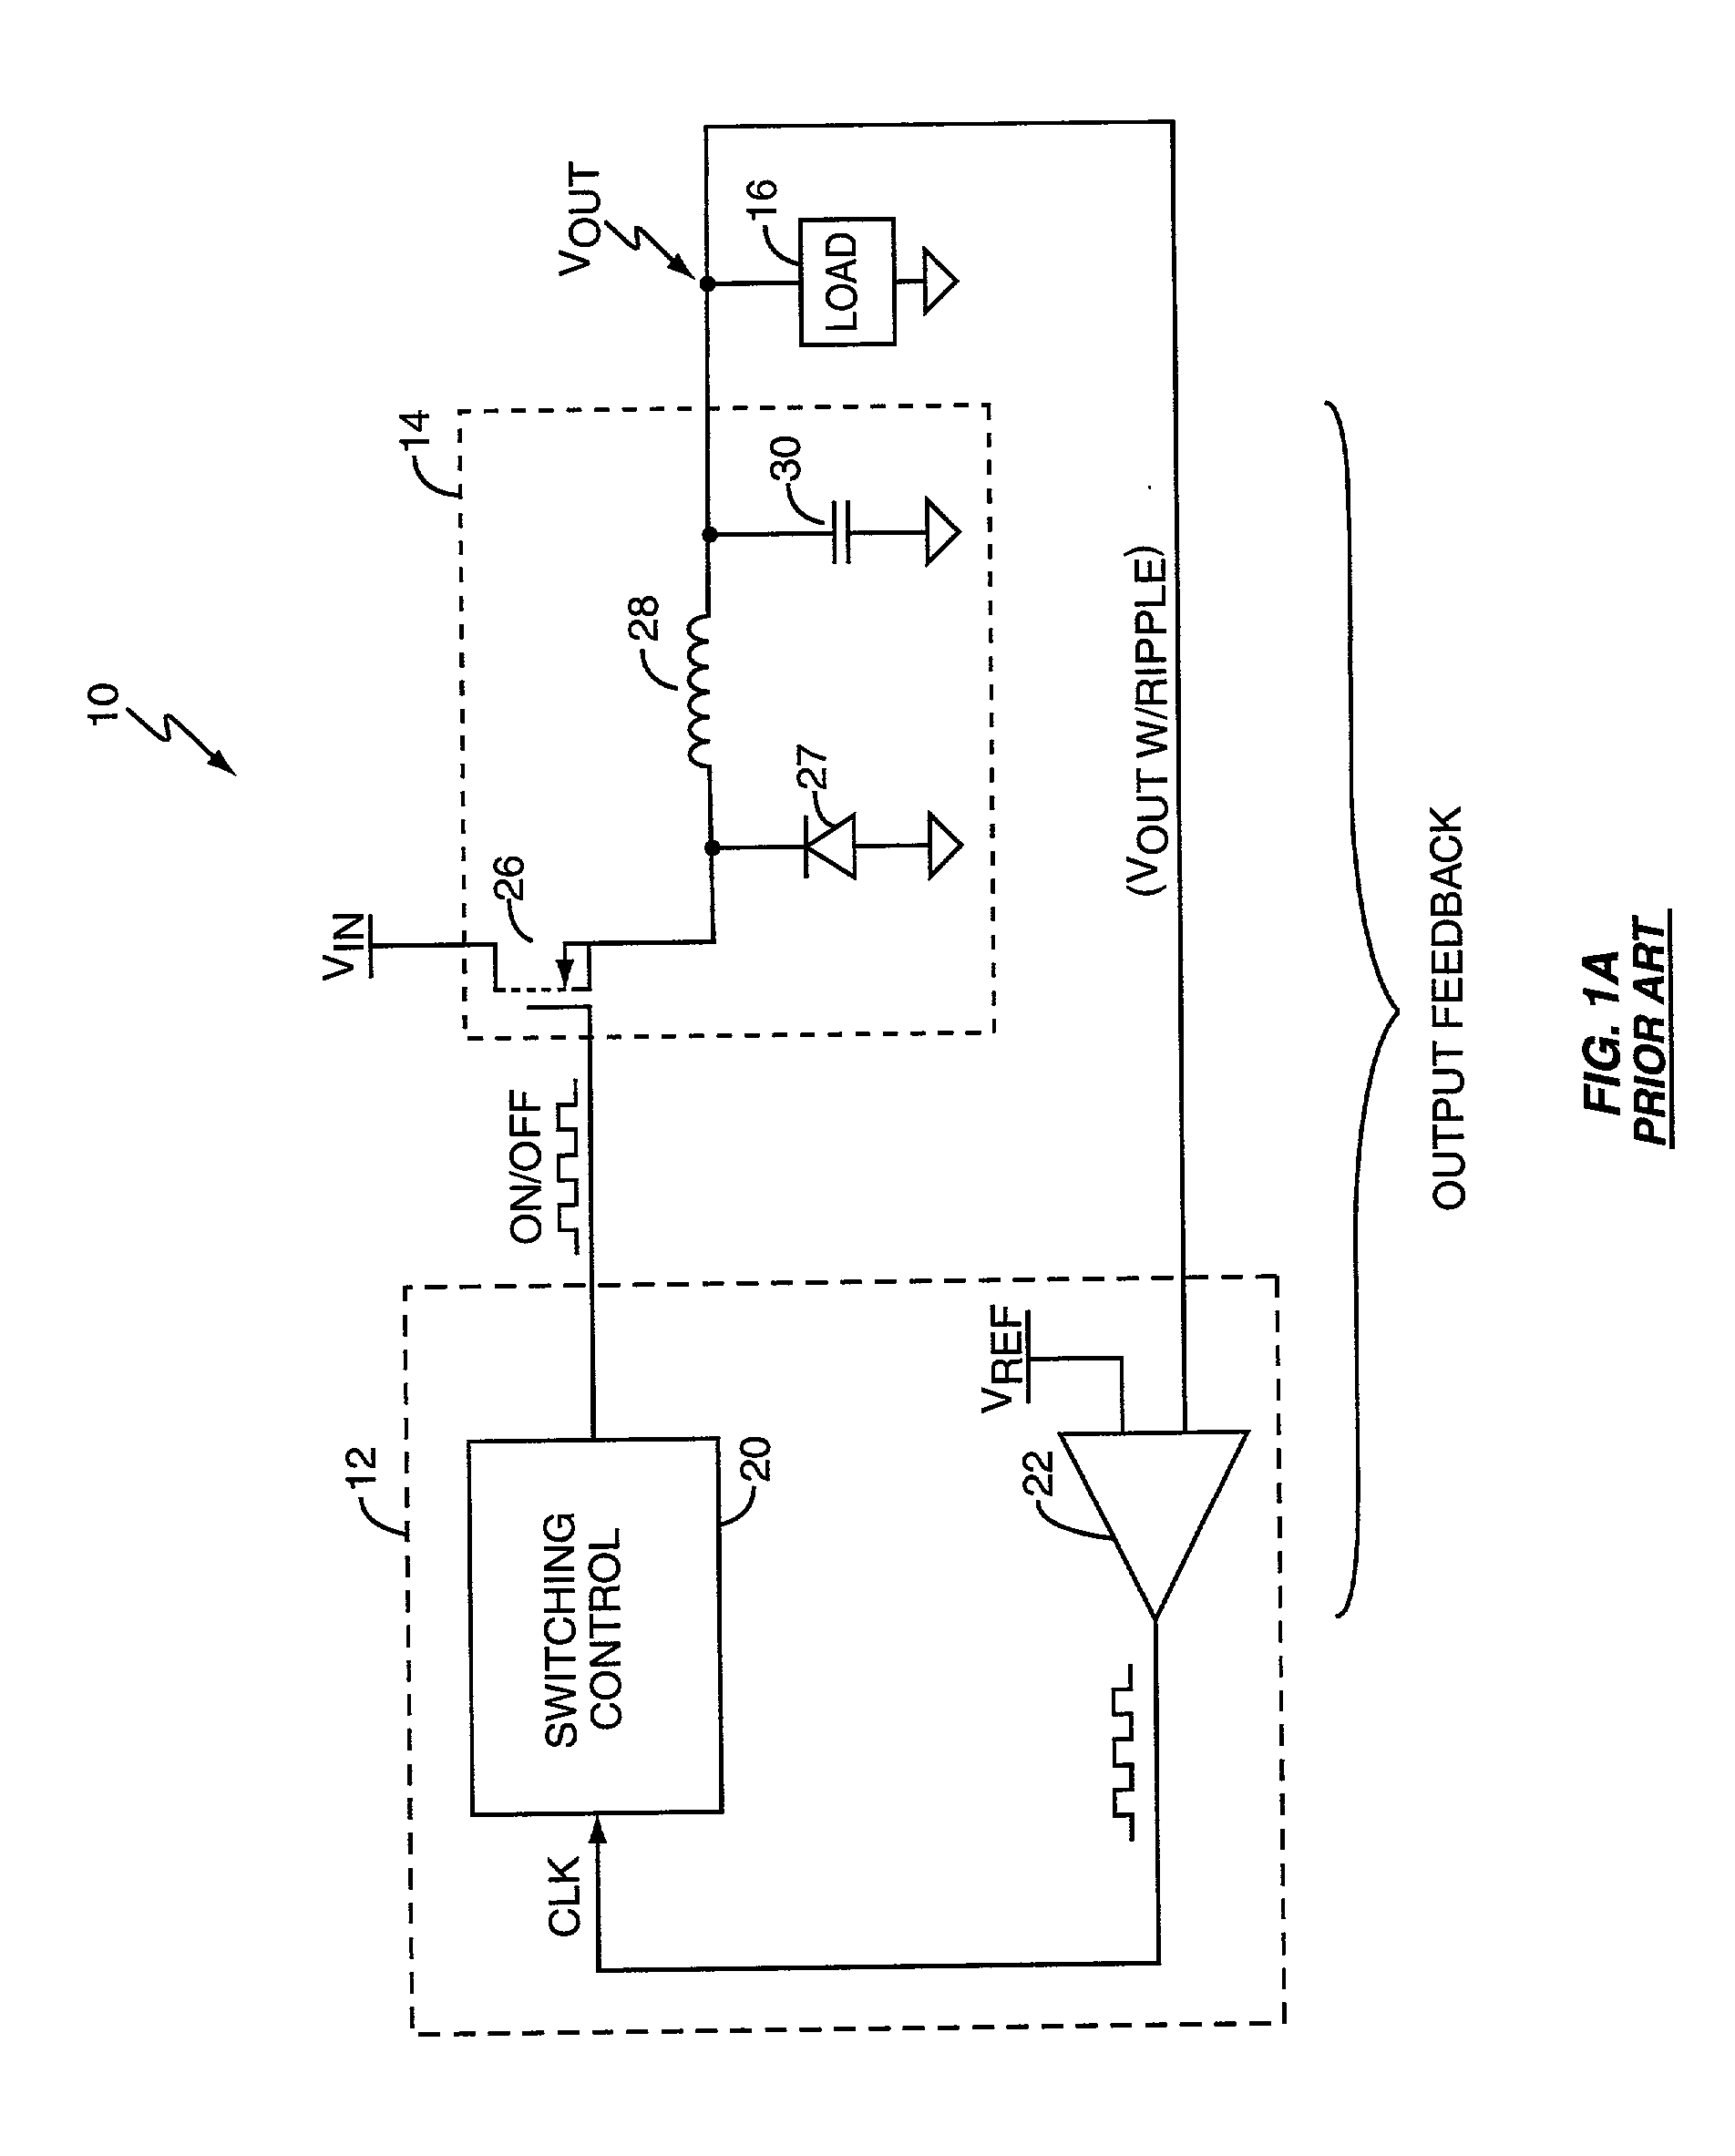 Self-clocking multiphase power supply controller